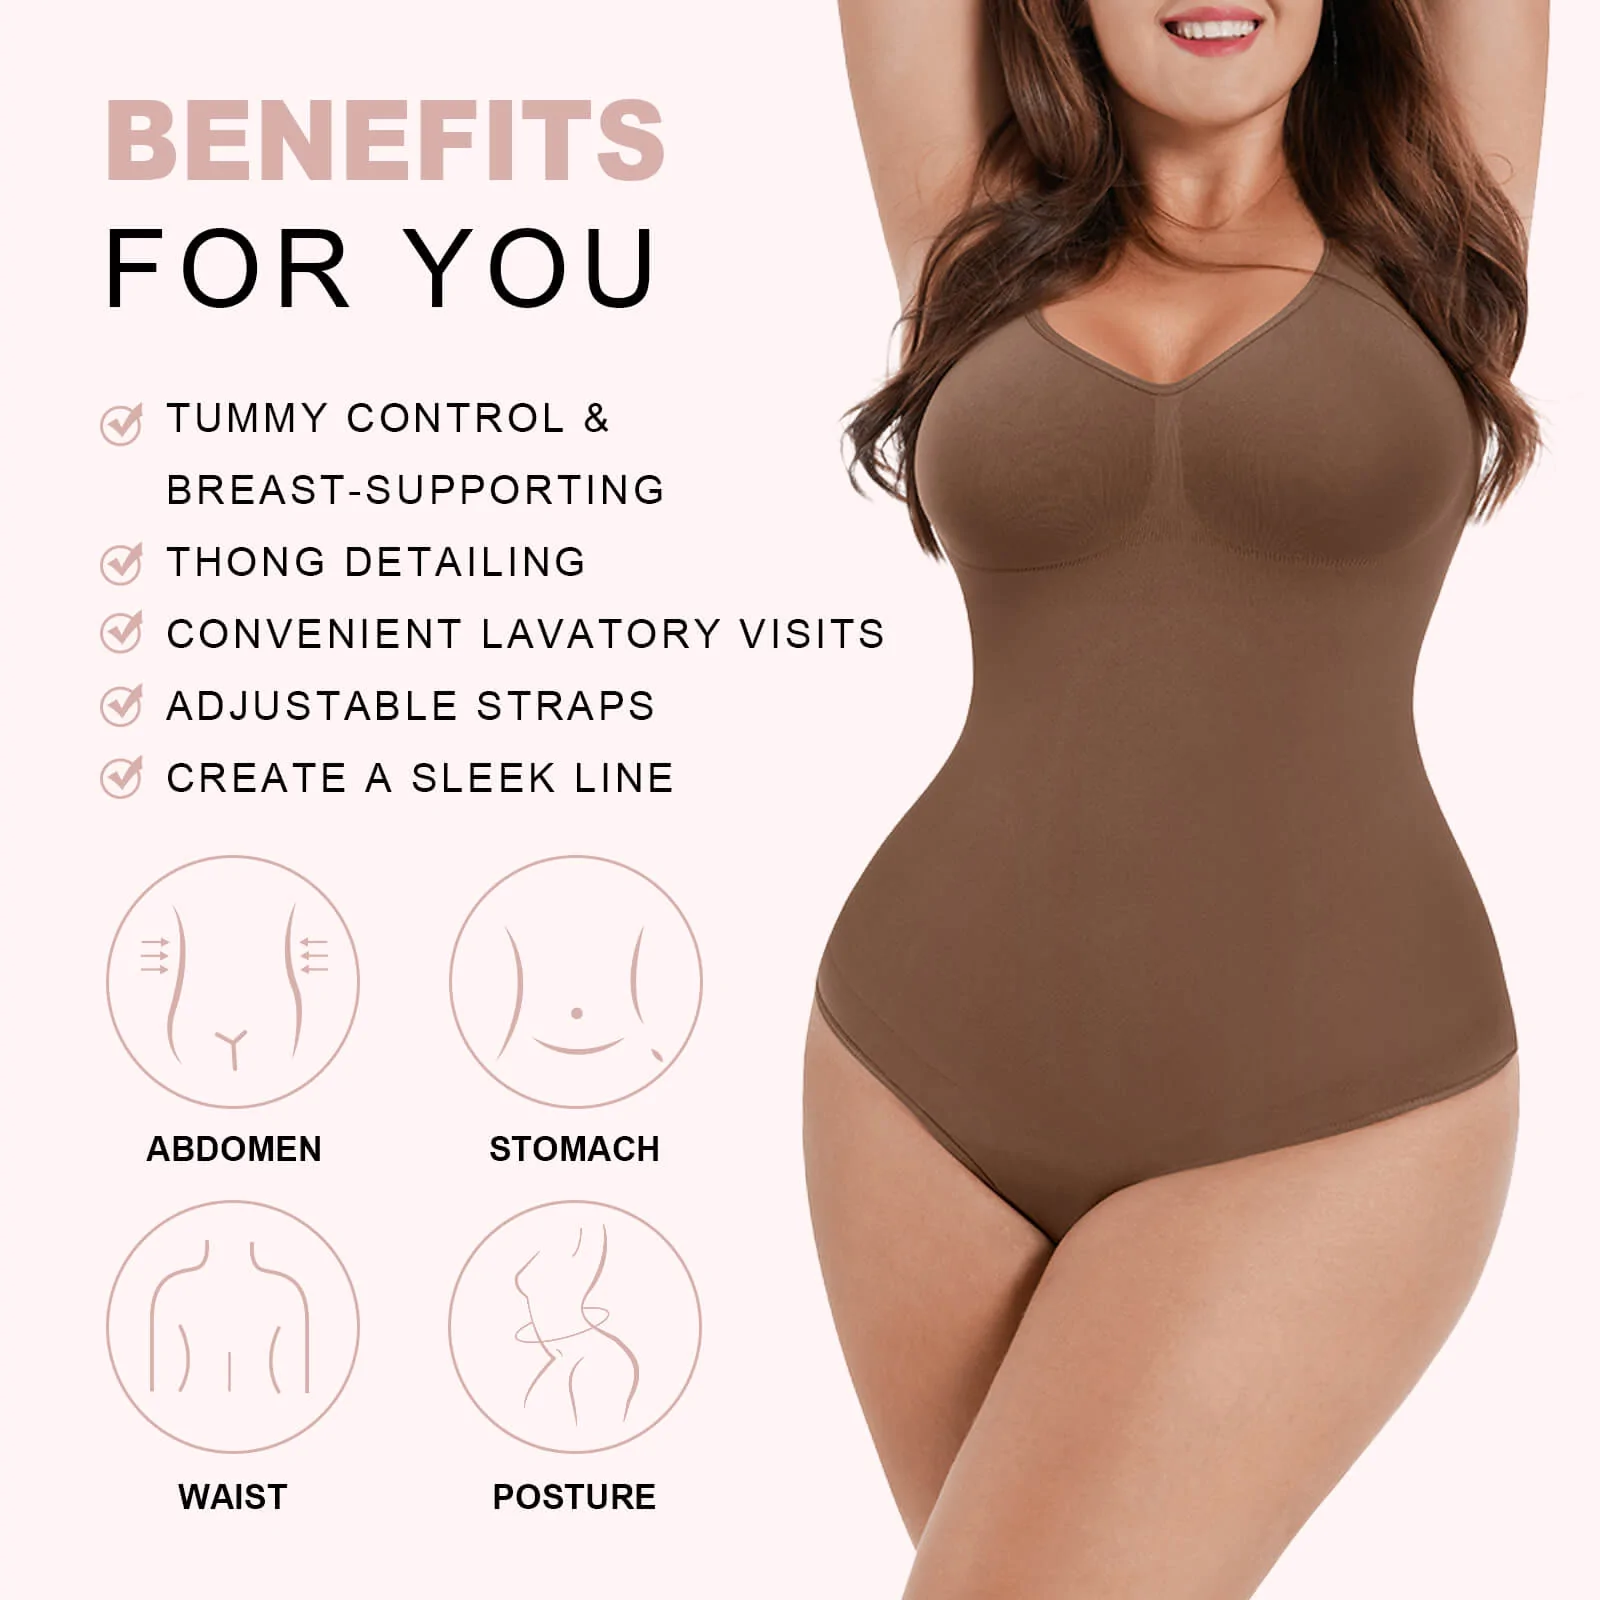 Wholesale Shapewear Suppliers for Retailers